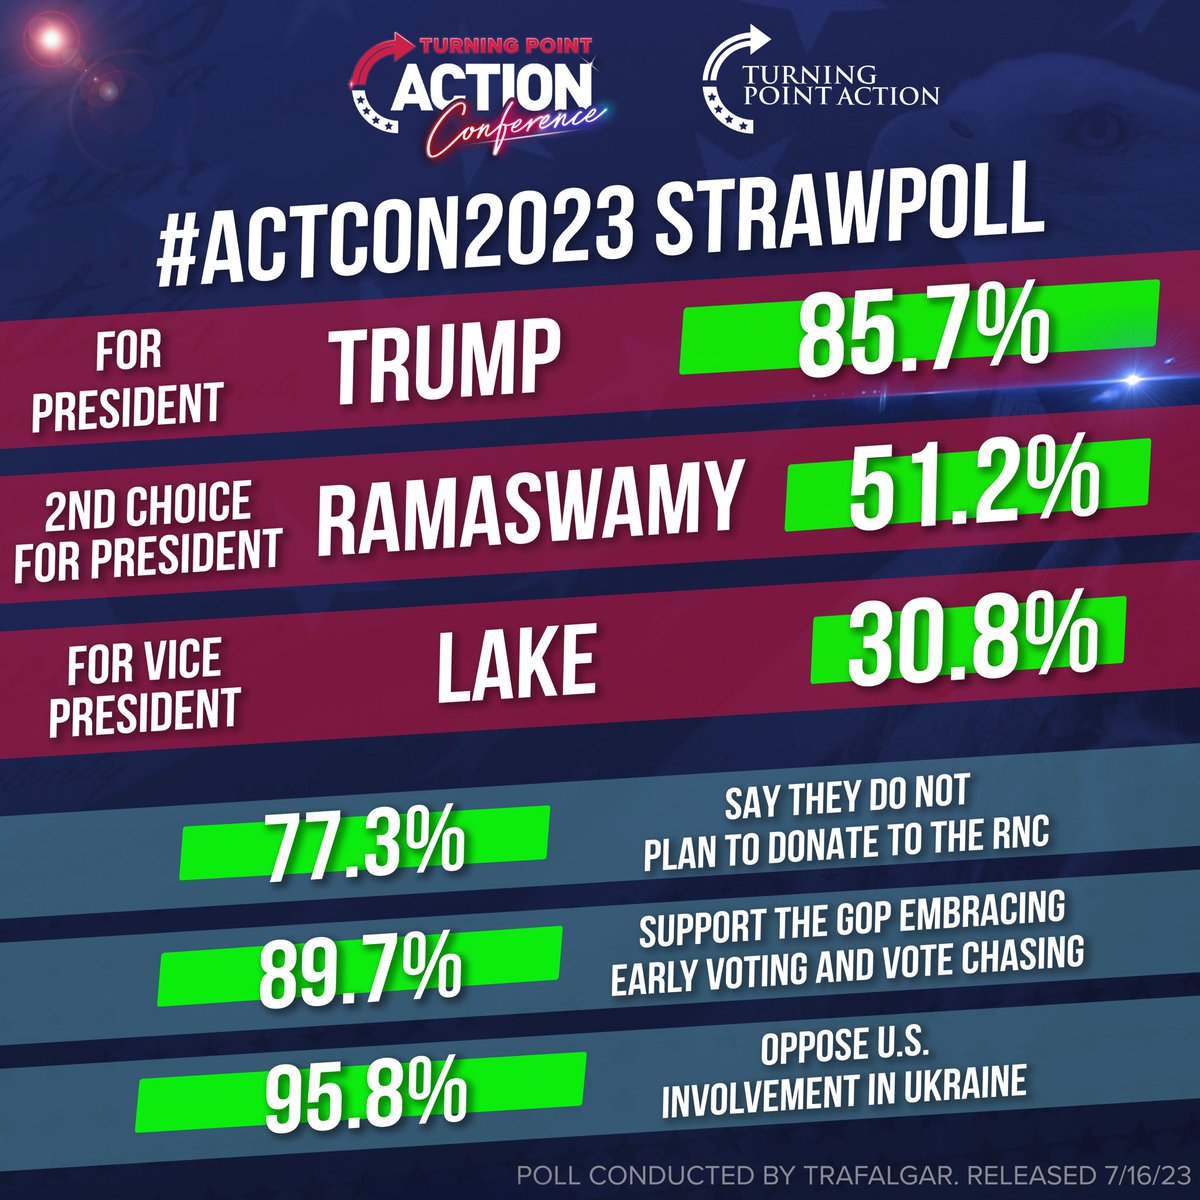 BREAKING:  Donald Trump wins new straw poll with staggering 85.7% of the vote!

Congratulations to @realDonaldTrump, @VivekGRamaswamy, & @KariLake on being the top vote getters in the Turning Point Action #ACTCON2023 poll by Trafalgar!